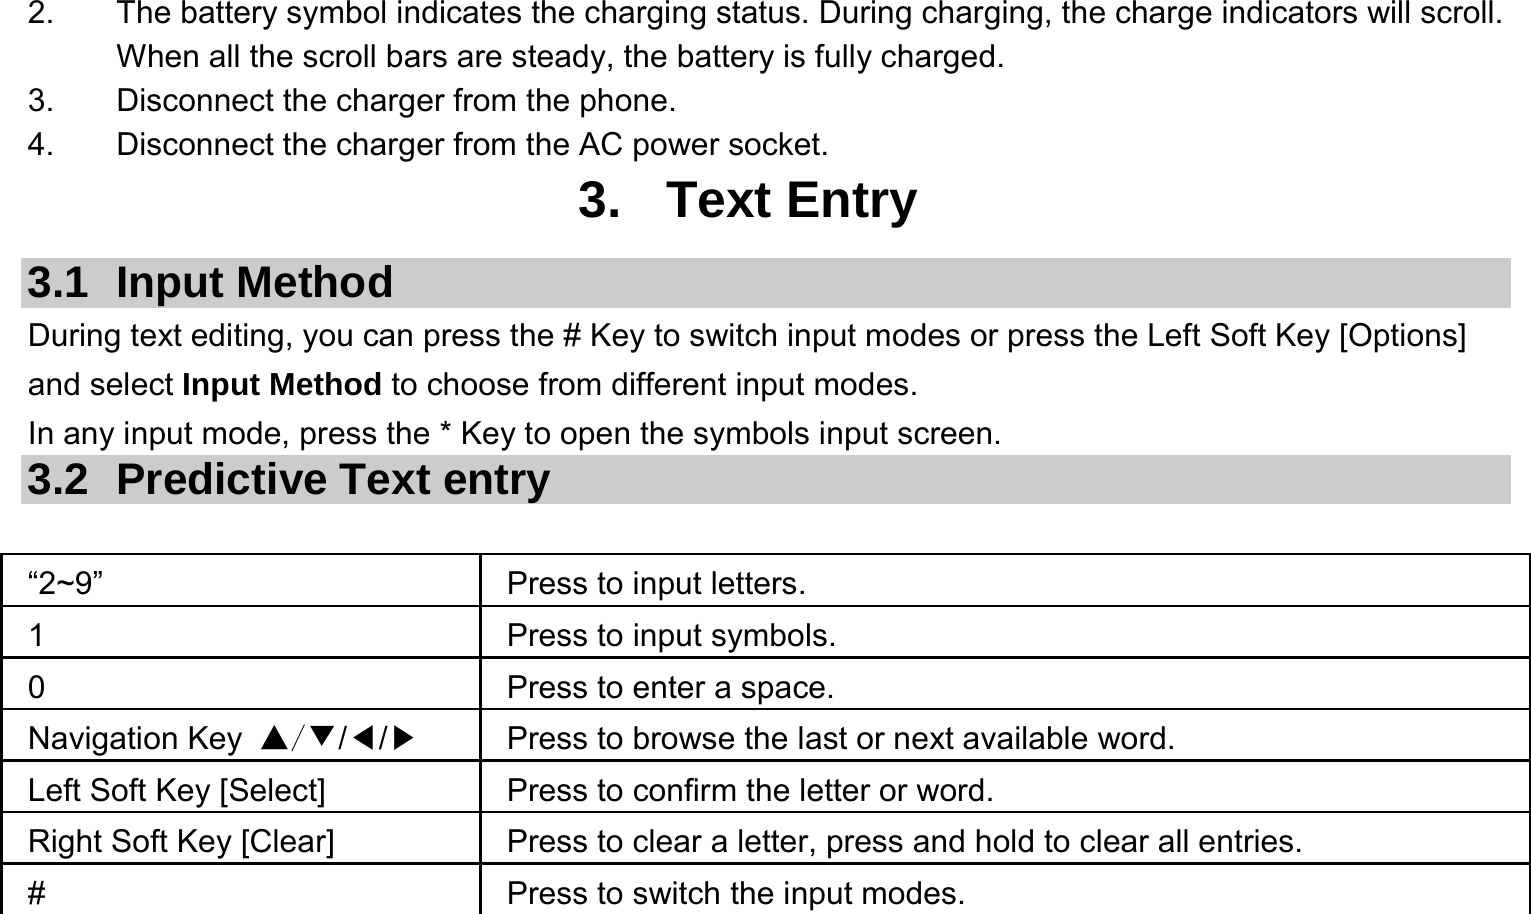  2.  The battery symbol indicates the charging status. During charging, the charge indicators will scroll. When all the scroll bars are steady, the battery is fully charged.   3.  Disconnect the charger from the phone. 4.  Disconnect the charger from the AC power socket. 3. Text Entry 3.1 Input Method During text editing, you can press the # Key to switch input modes or press the Left Soft Key [Options] and select Input Method to choose from different input modes. In any input mode, press the * Key to open the symbols input screen.   3.2  Predictive Text entry  “2~9”     Press to input letters. 1  Press to input symbols. 0  Press to enter a space. Navigation Key ▲/▼/◀/▶  Press to browse the last or next available word. Left Soft Key [Select]  Press to confirm the letter or word. Right Soft Key [Clear]  Press to clear a letter, press and hold to clear all entries. #  Press to switch the input modes. 